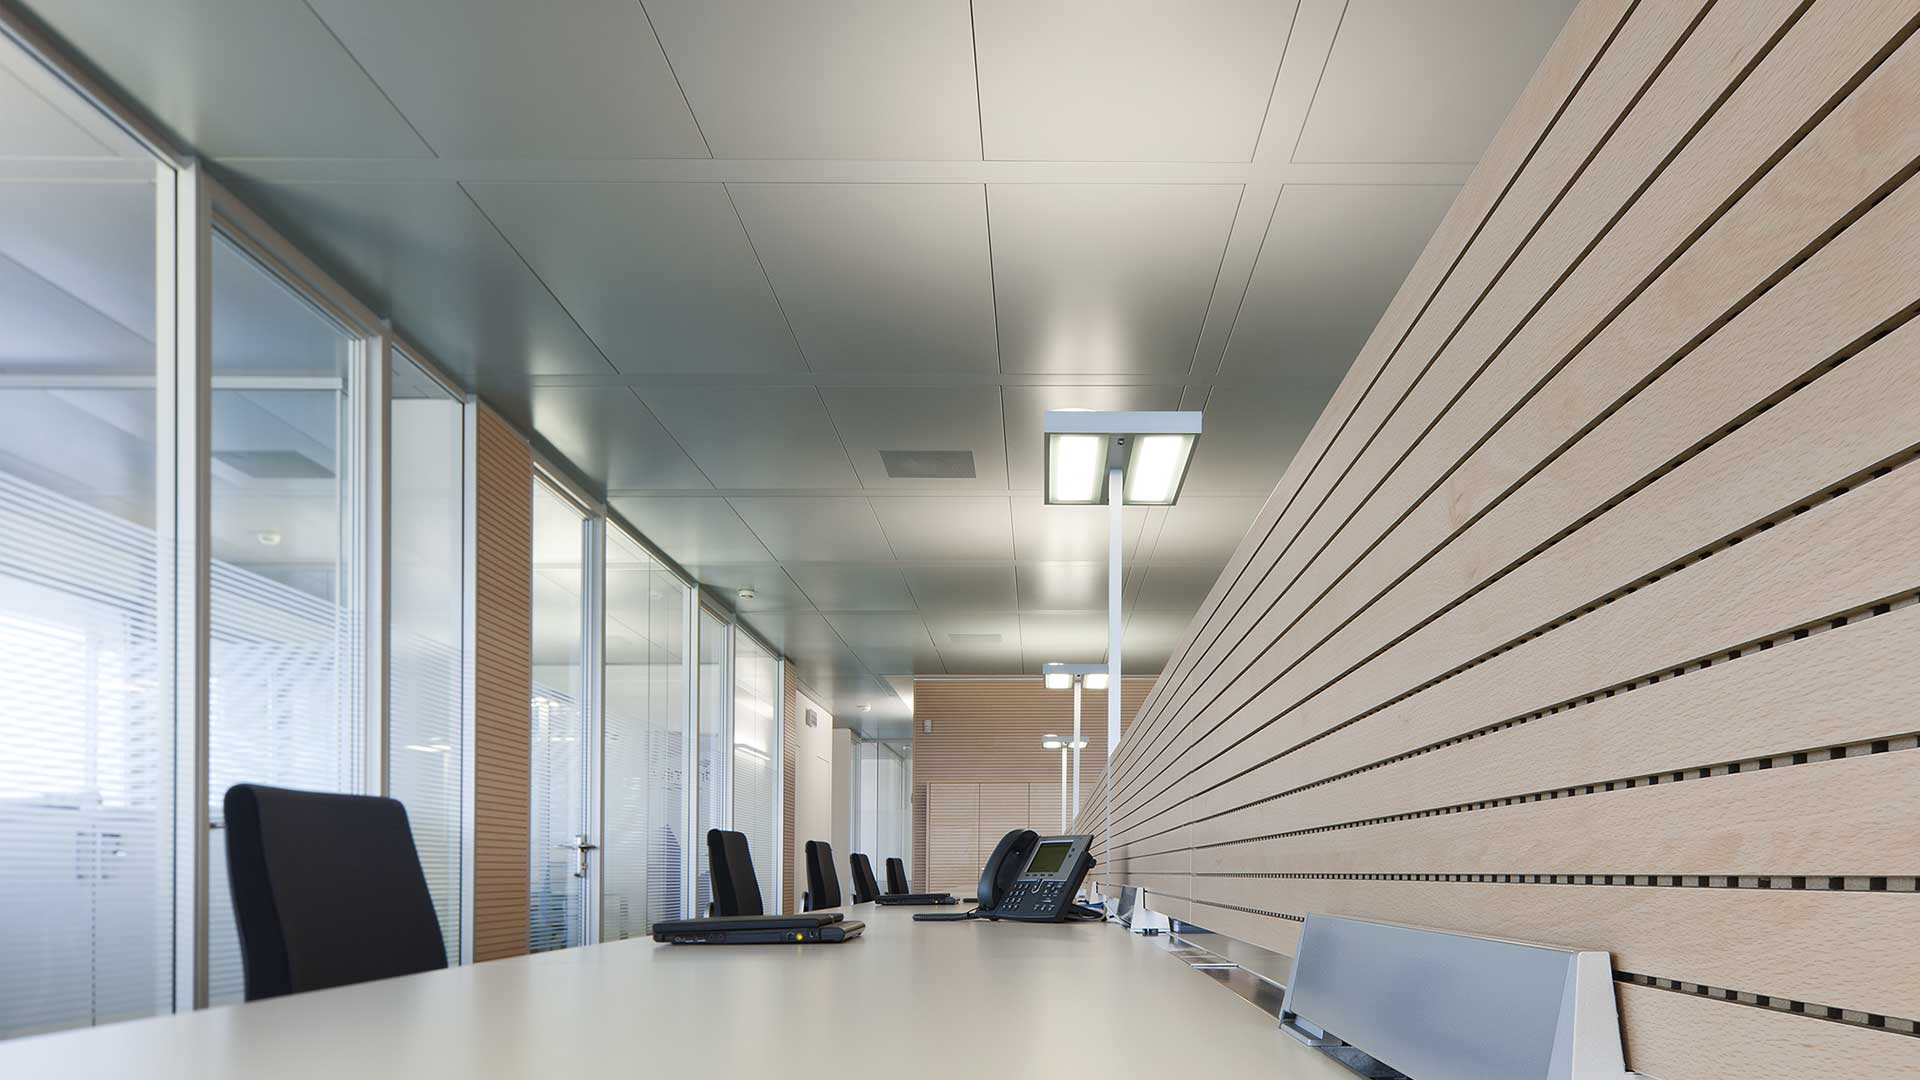 10 Solutions for the Office Sound Management, Soundproofing